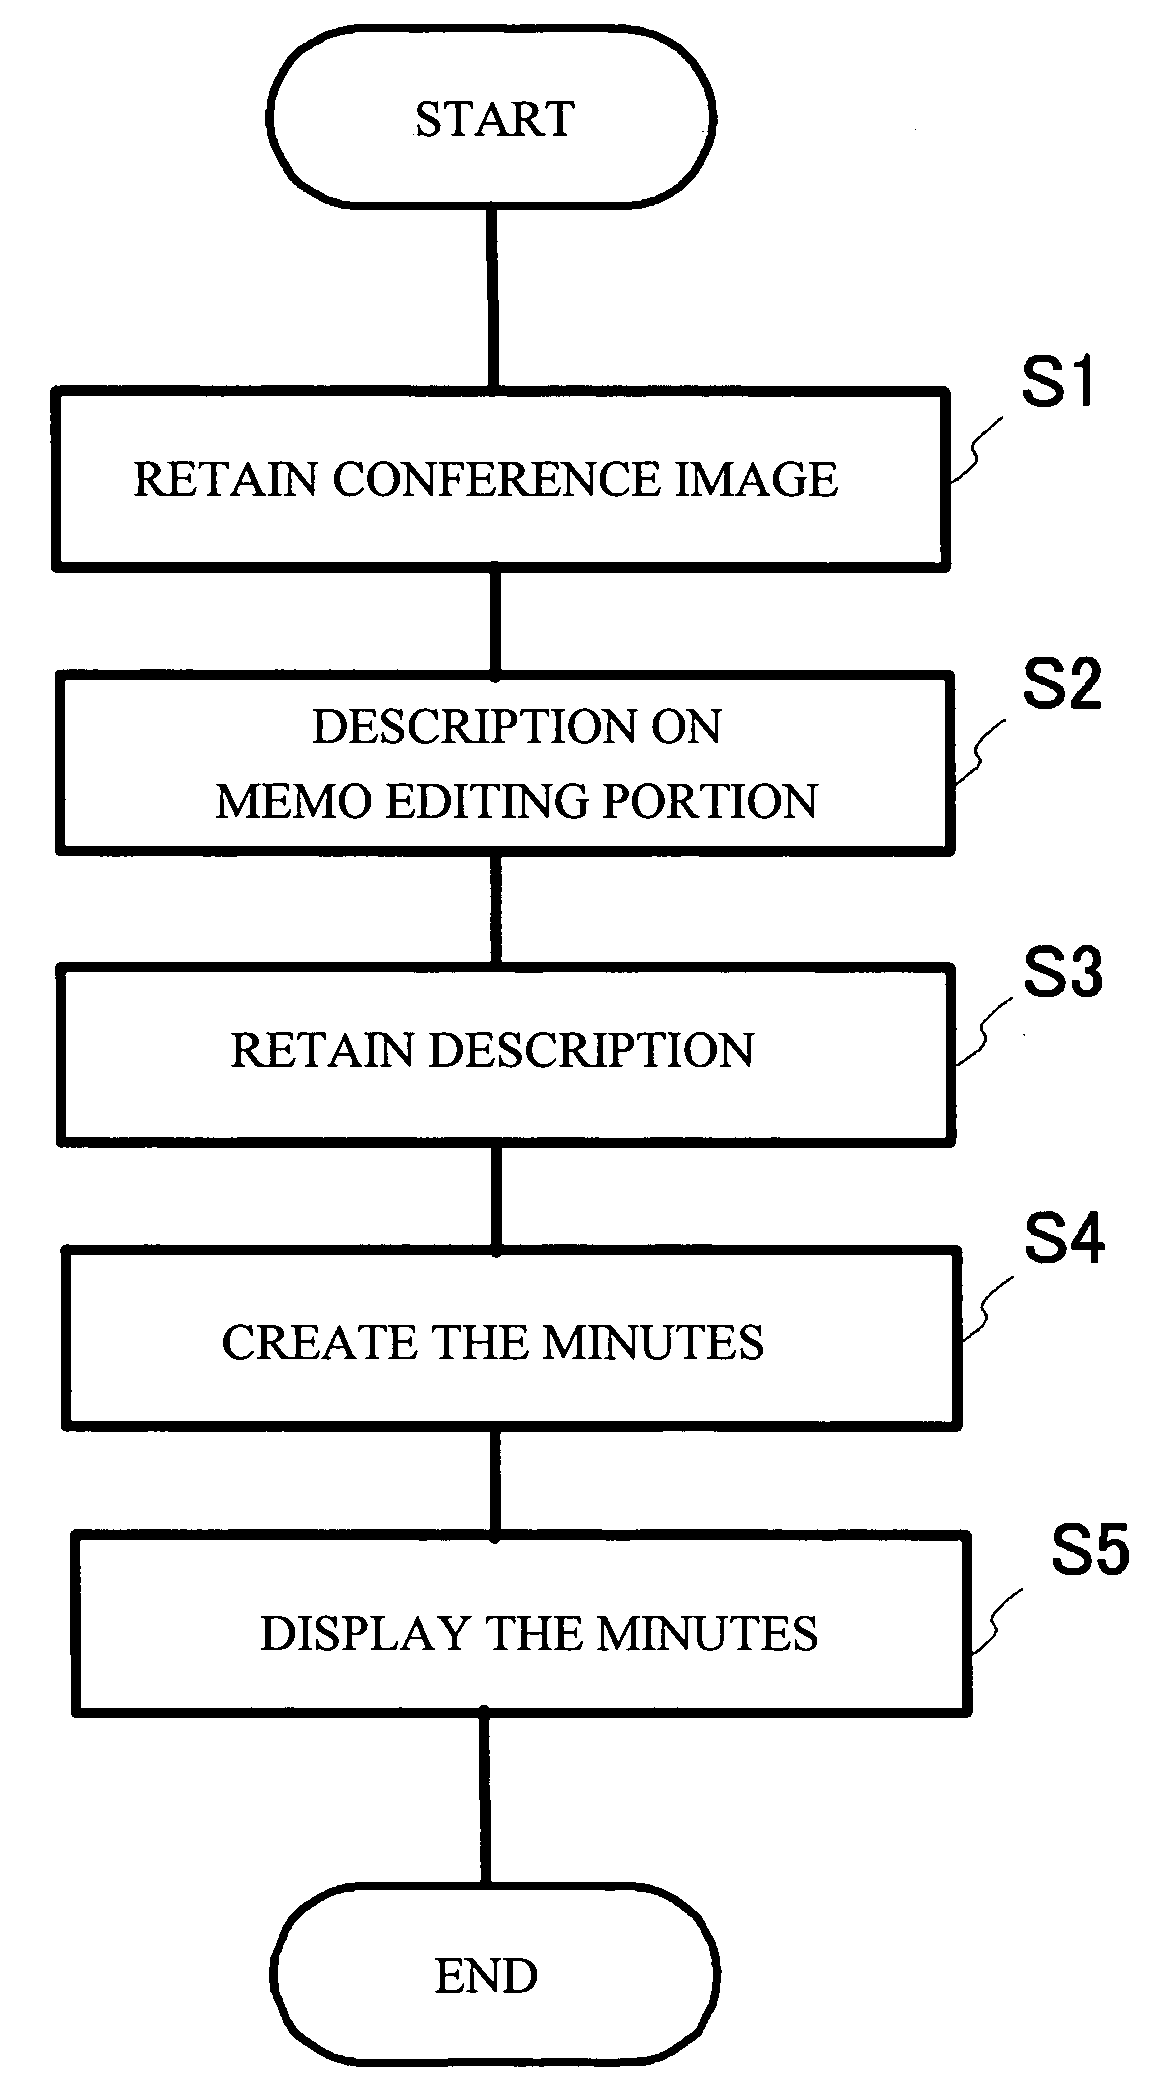 Minutes-creating support apparatus and method